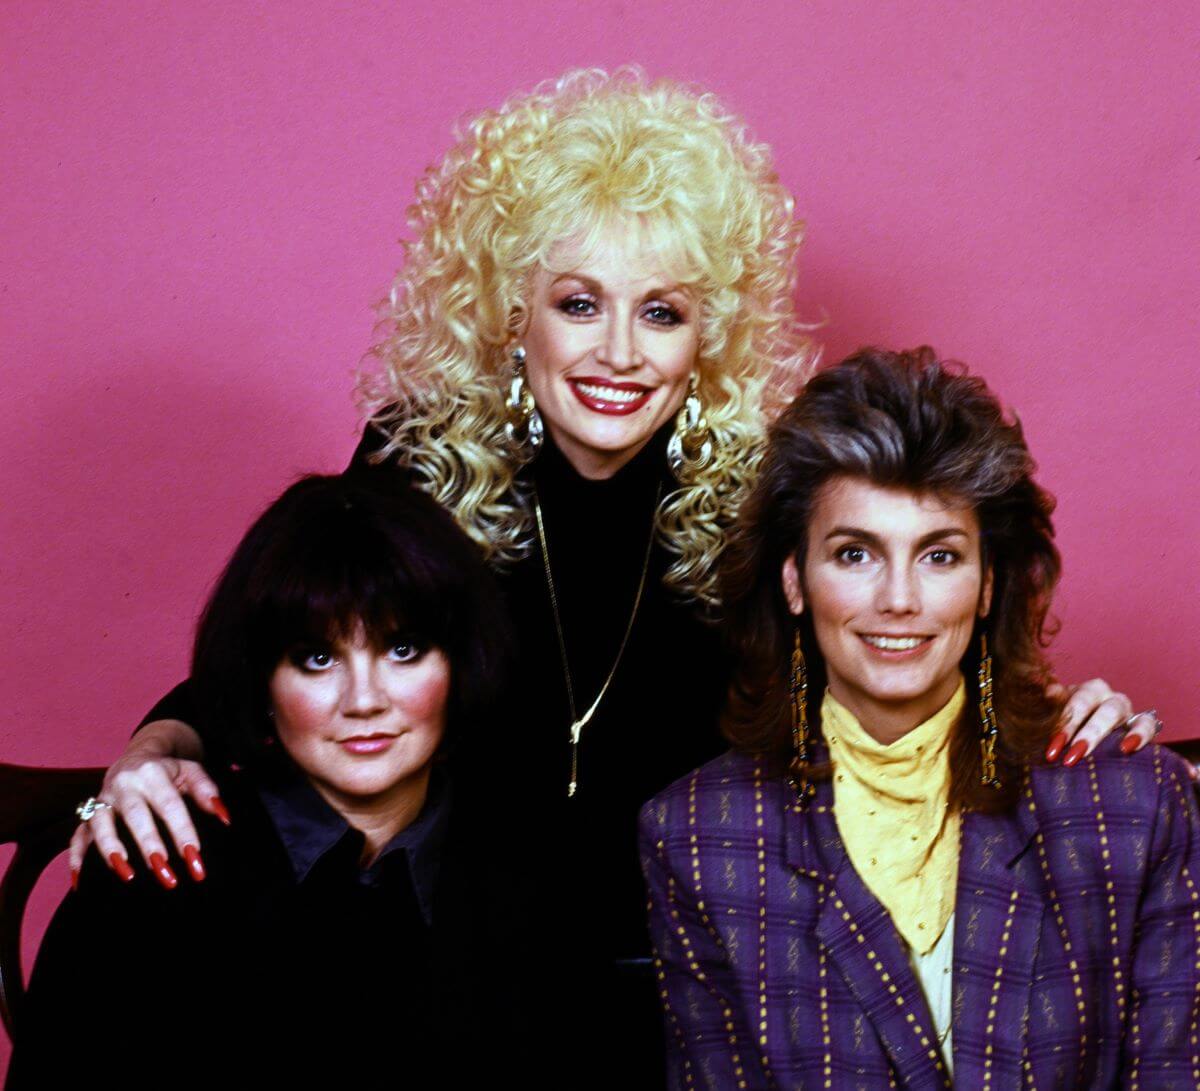 Dolly Parton stands behind Linda Ronstadt and Emmylou Harris. She has her hands on their shoulders.